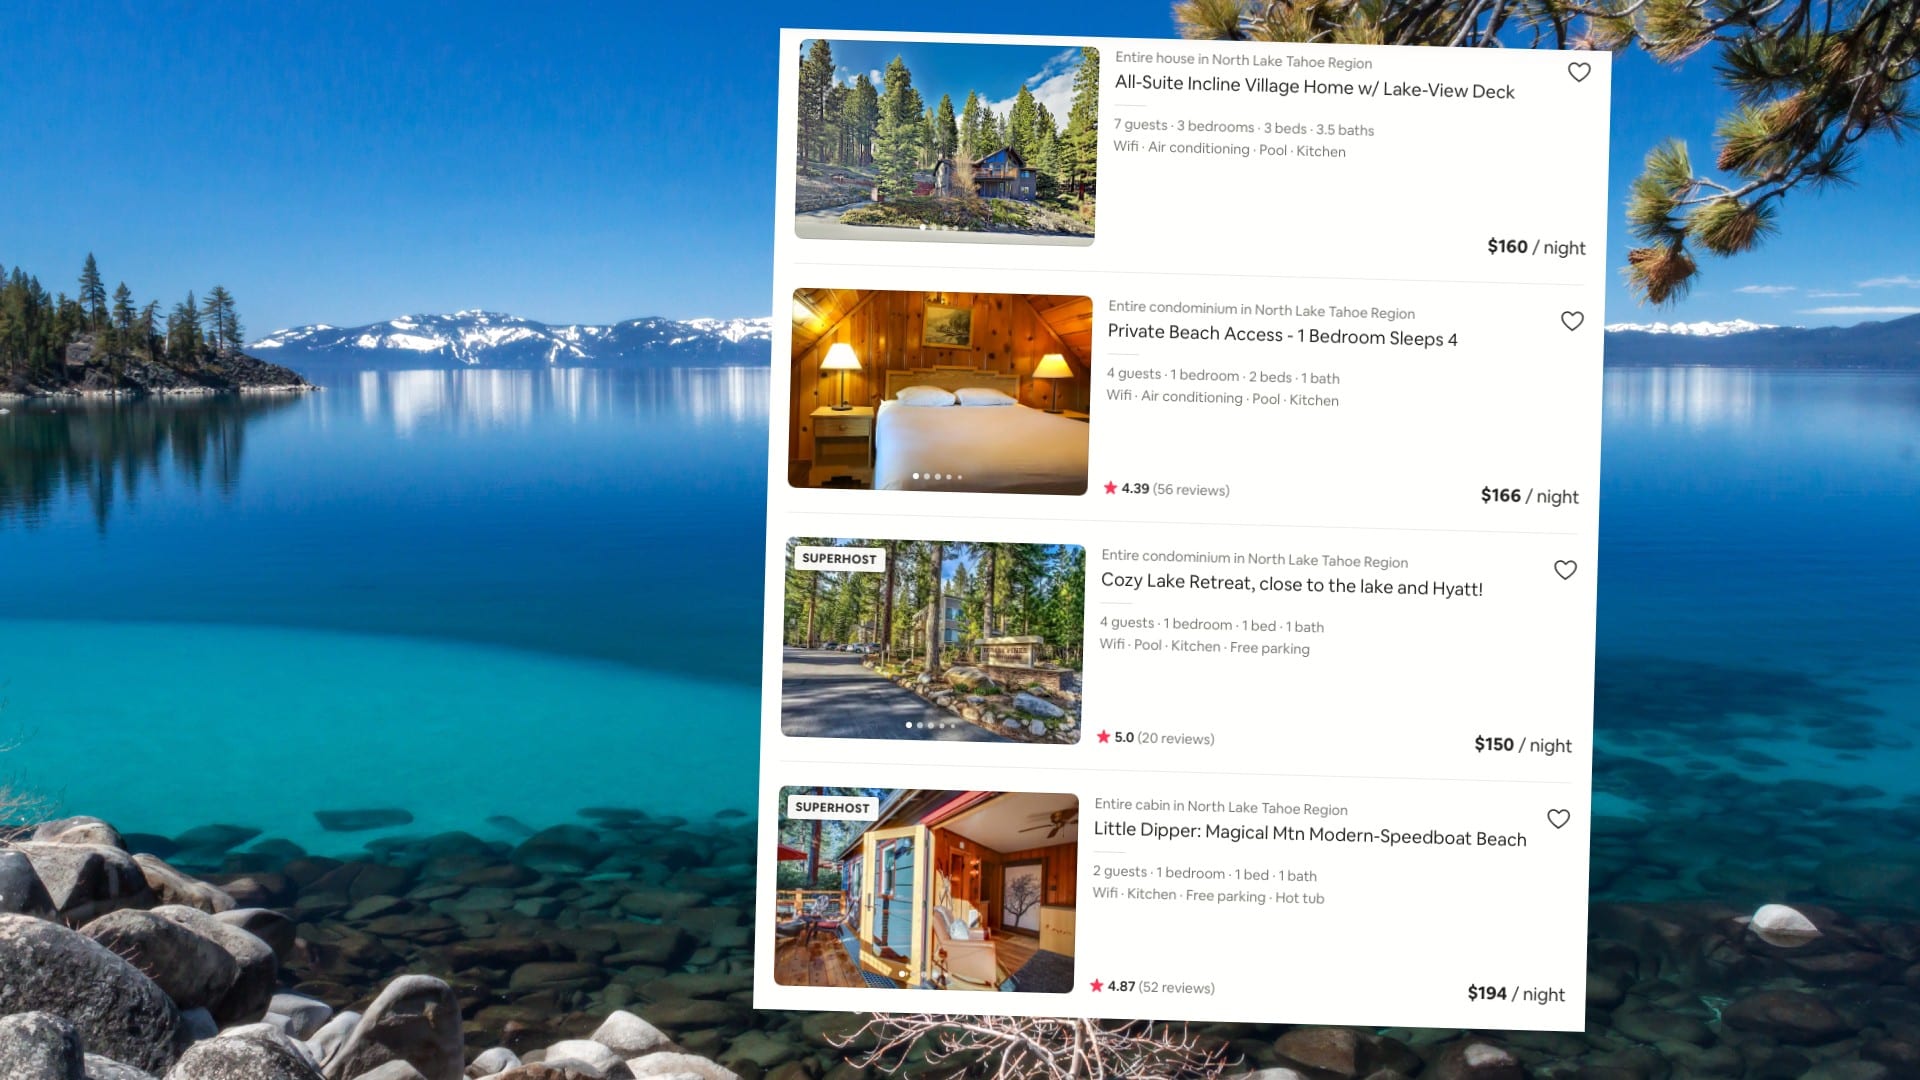 Tahoe areas except Incline Village crack down on vacation rentals